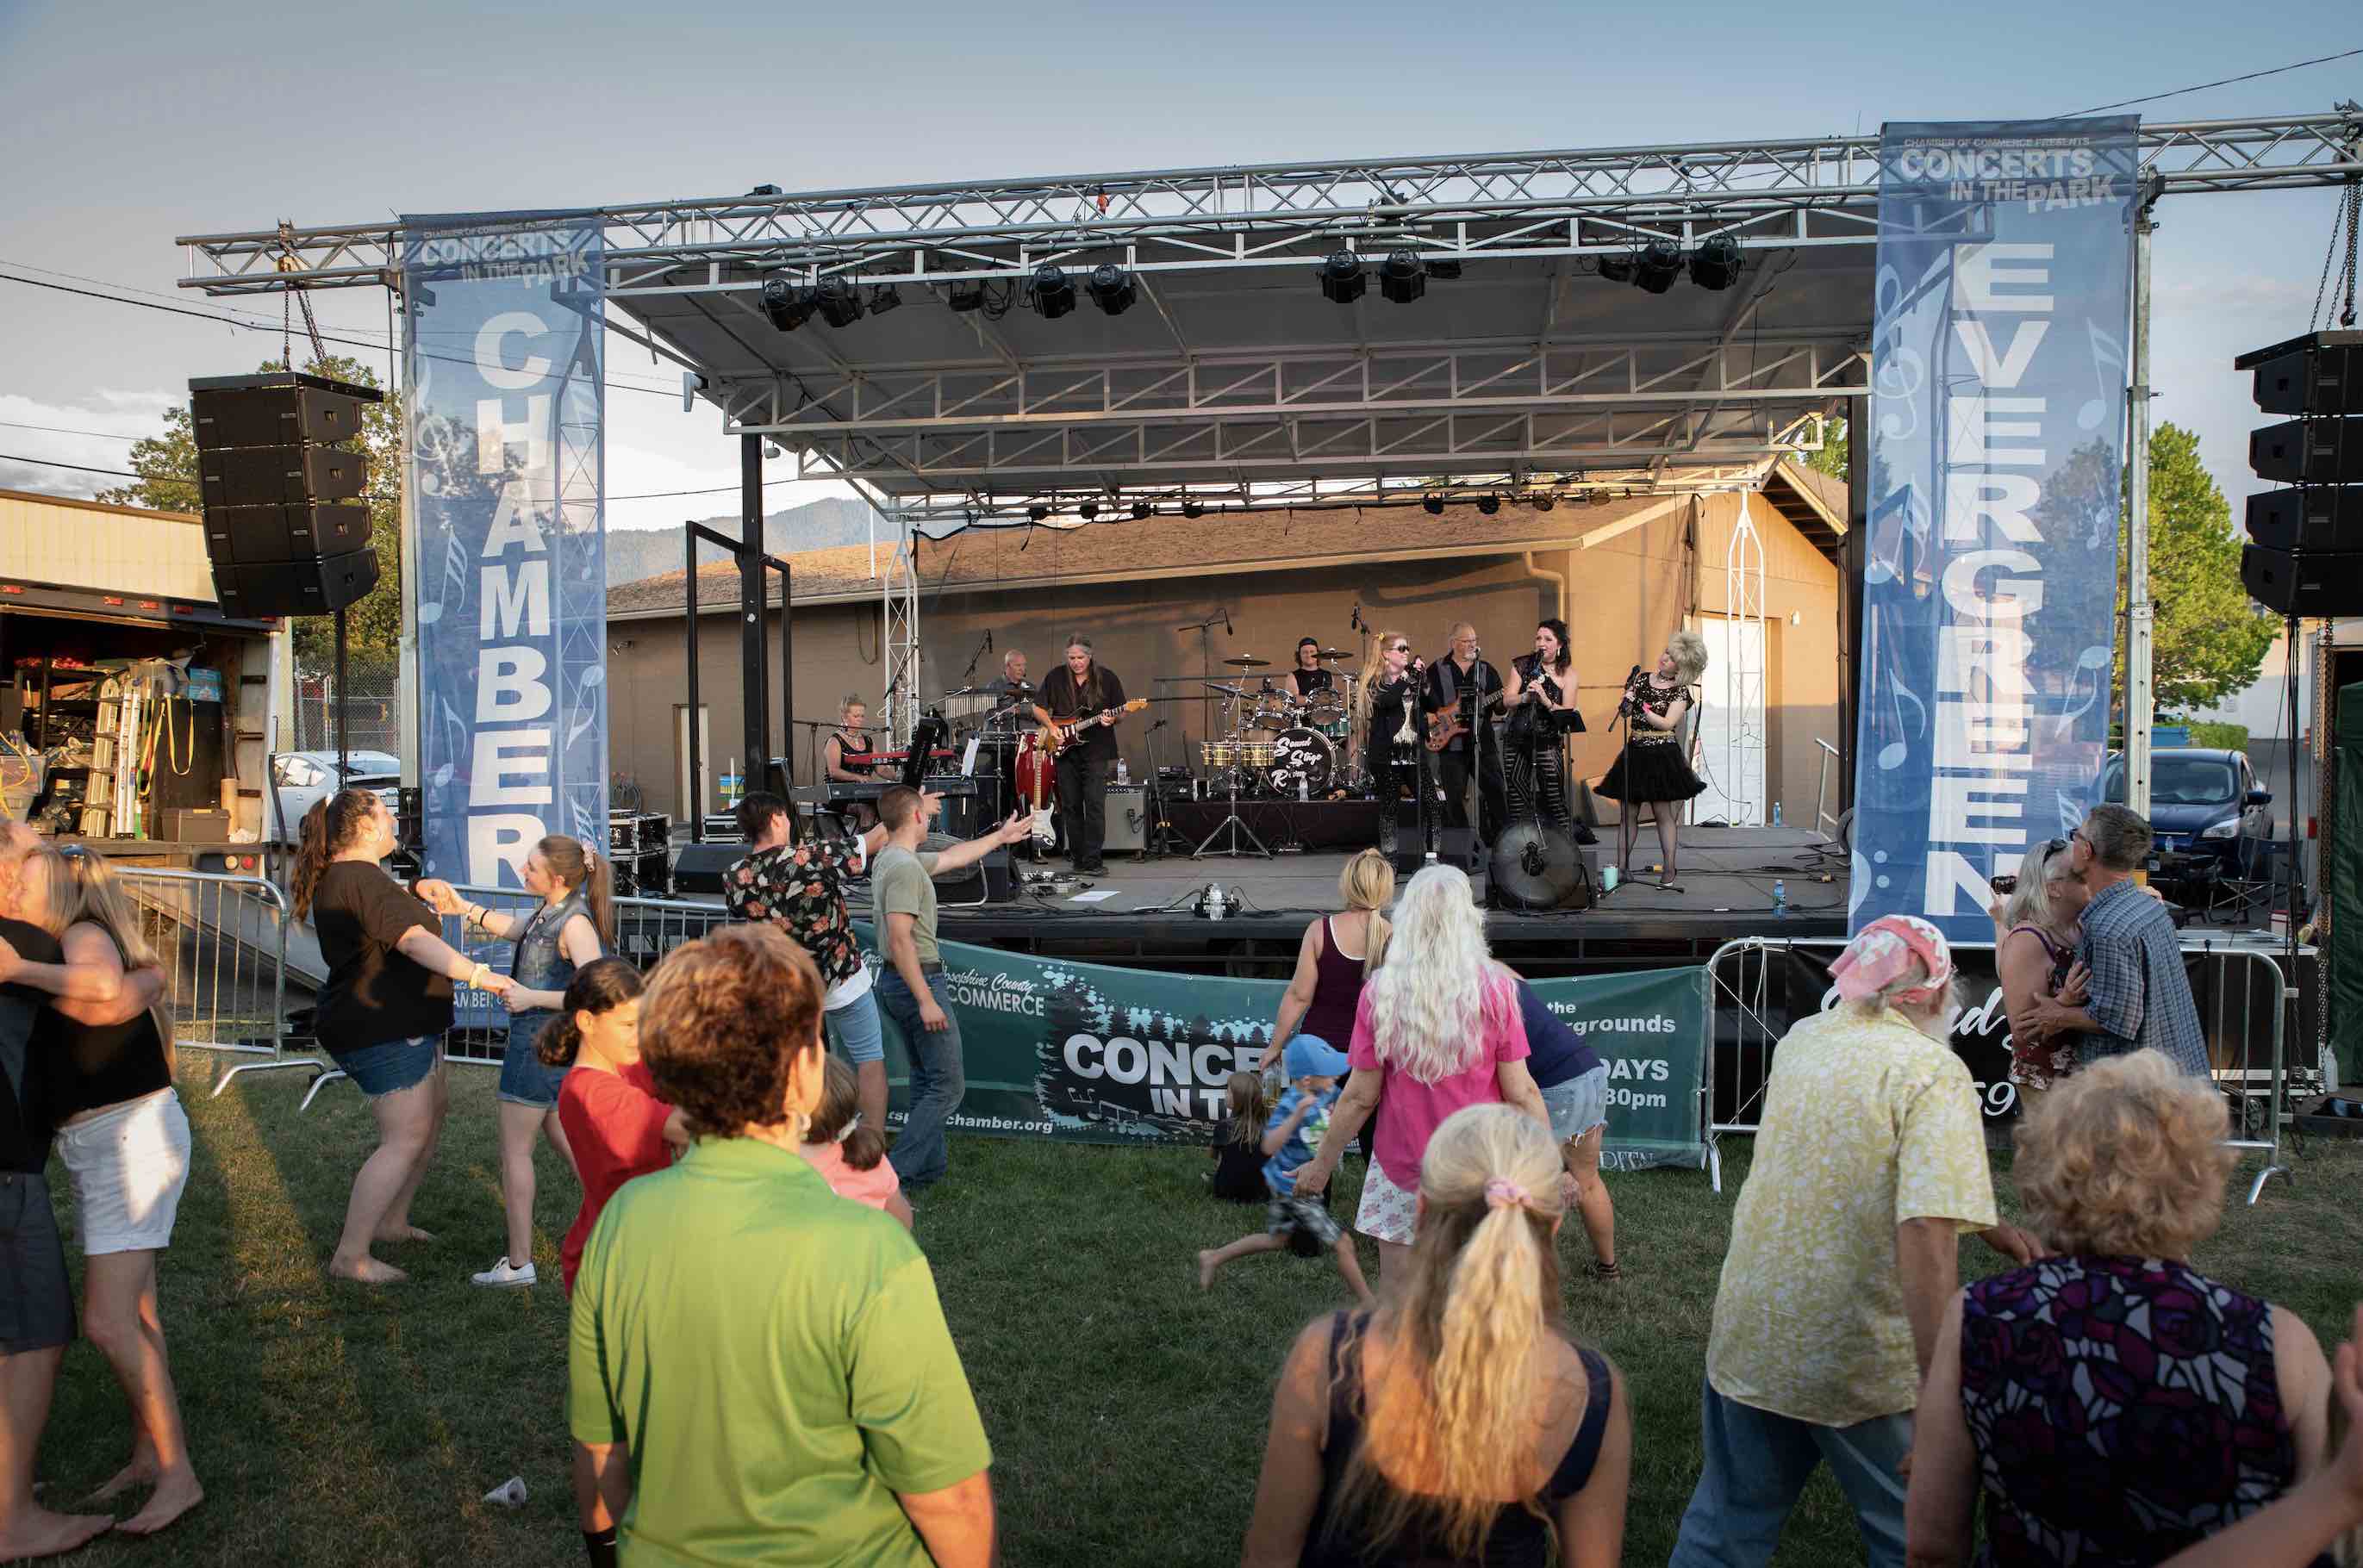 Concerts in the park Grants Pass